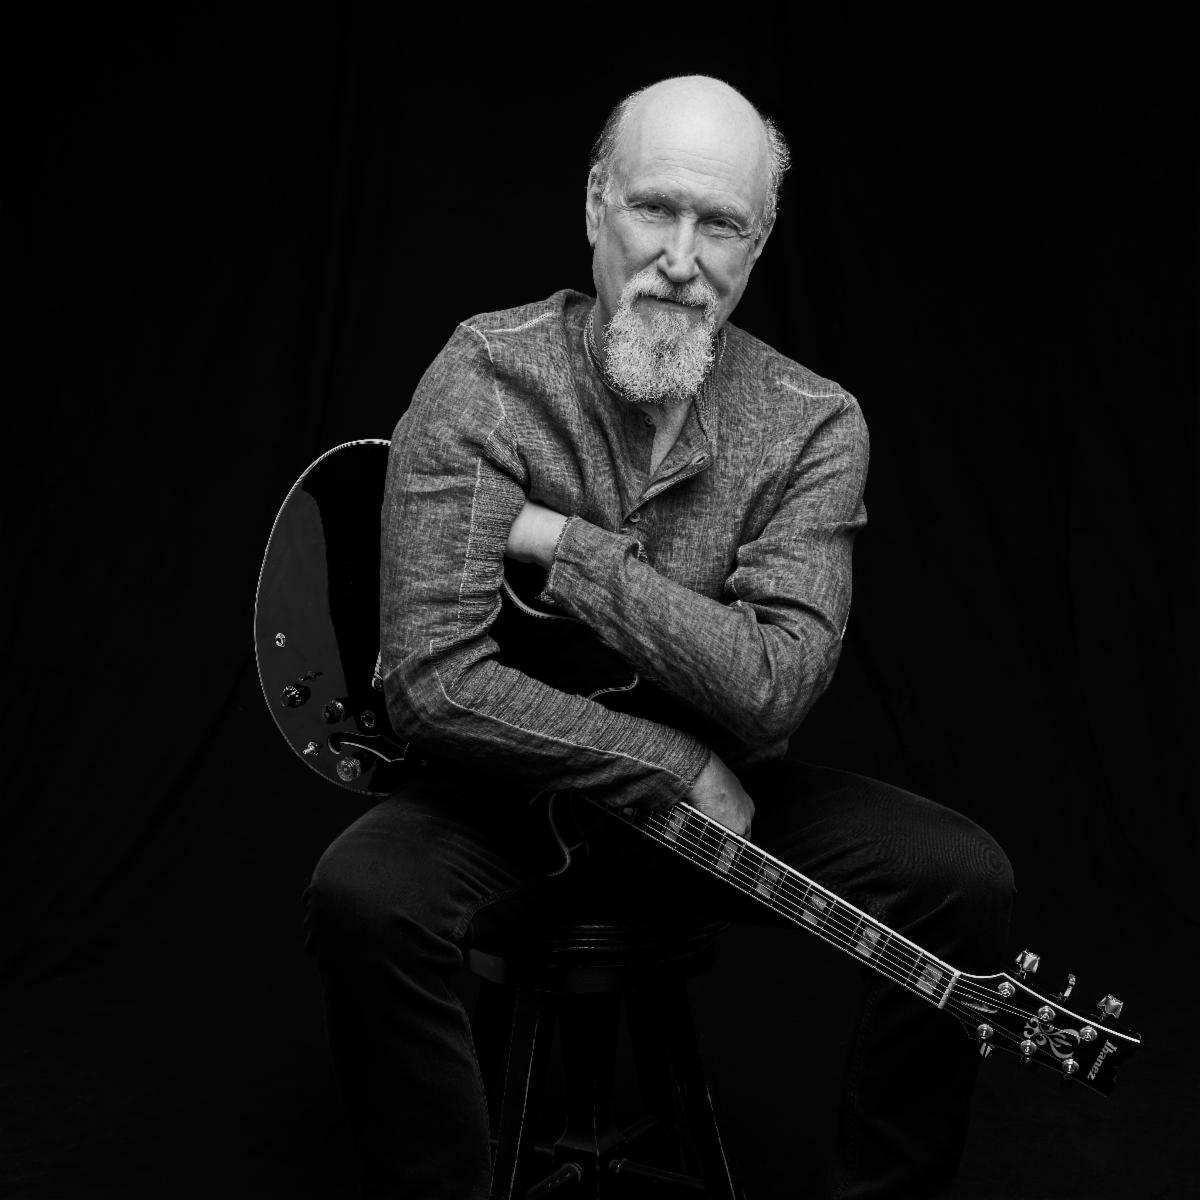 John Scofield performs at Suffolk Theater on April 6. NICK SUTTLE